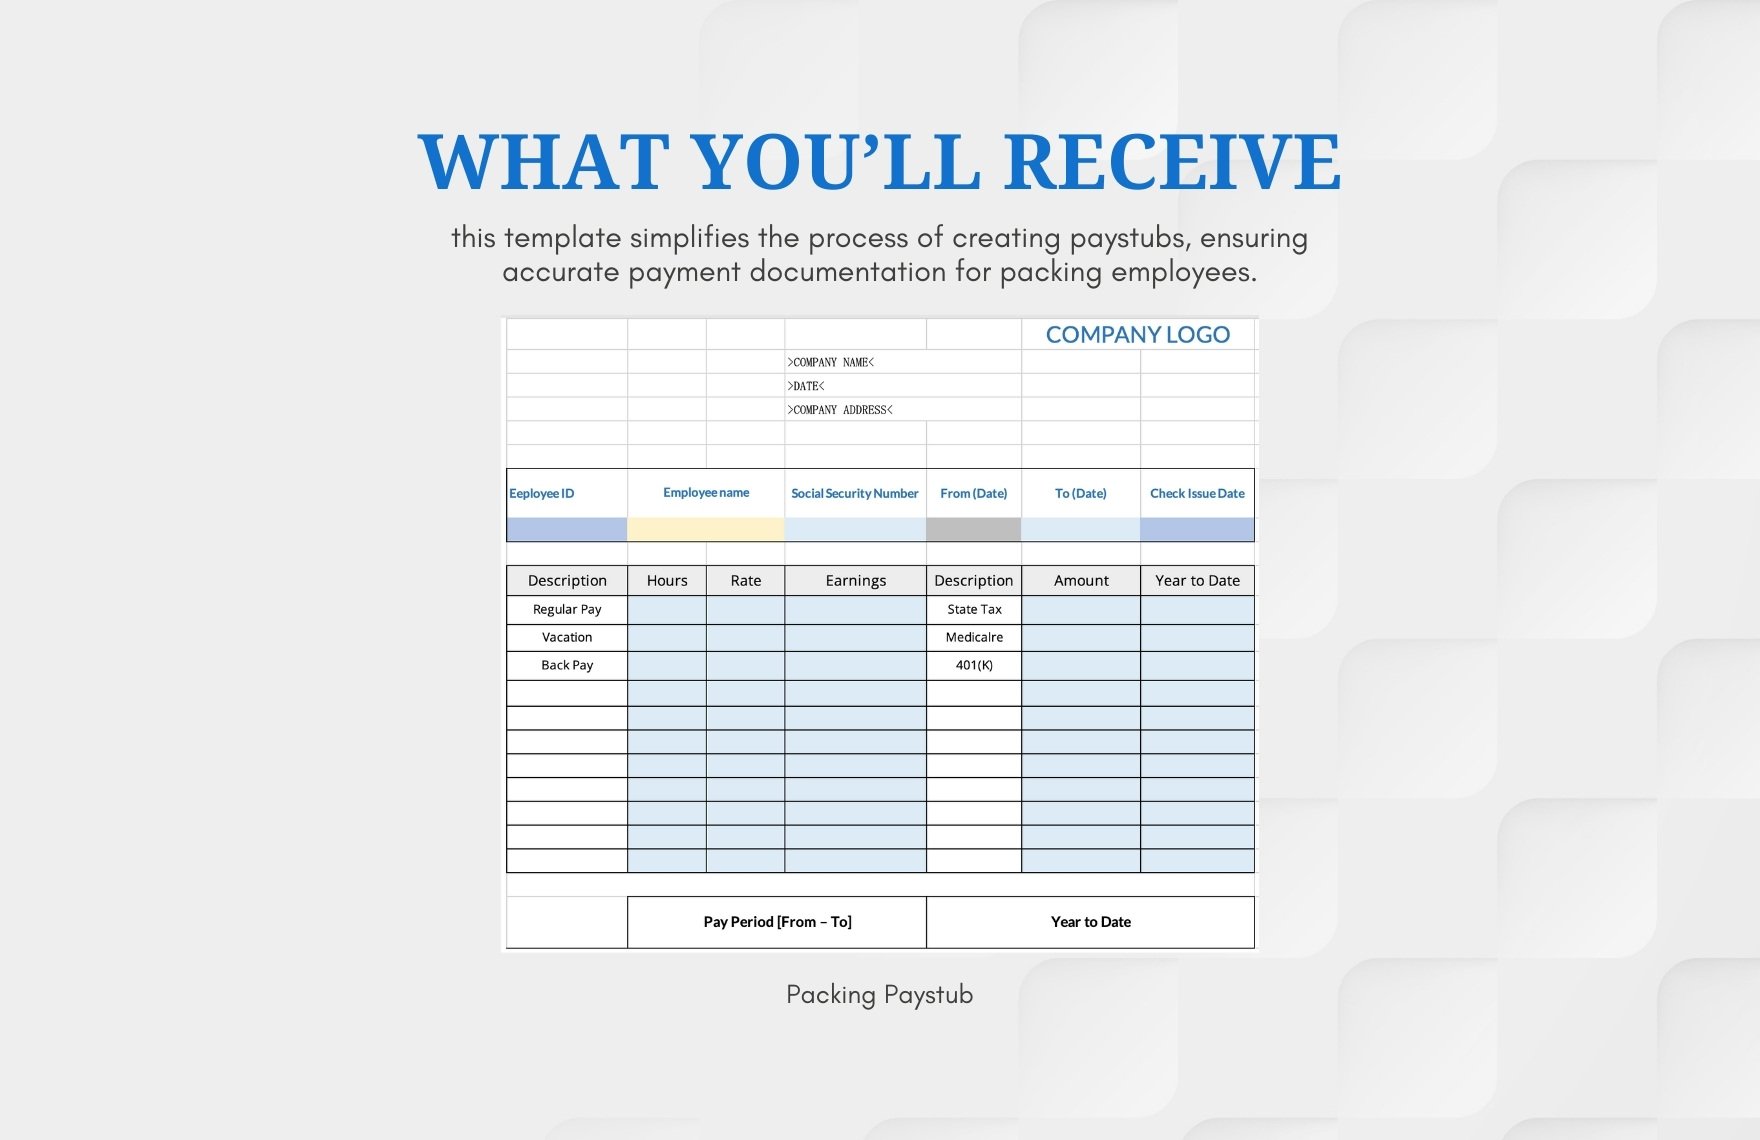 Packing Paystub Template